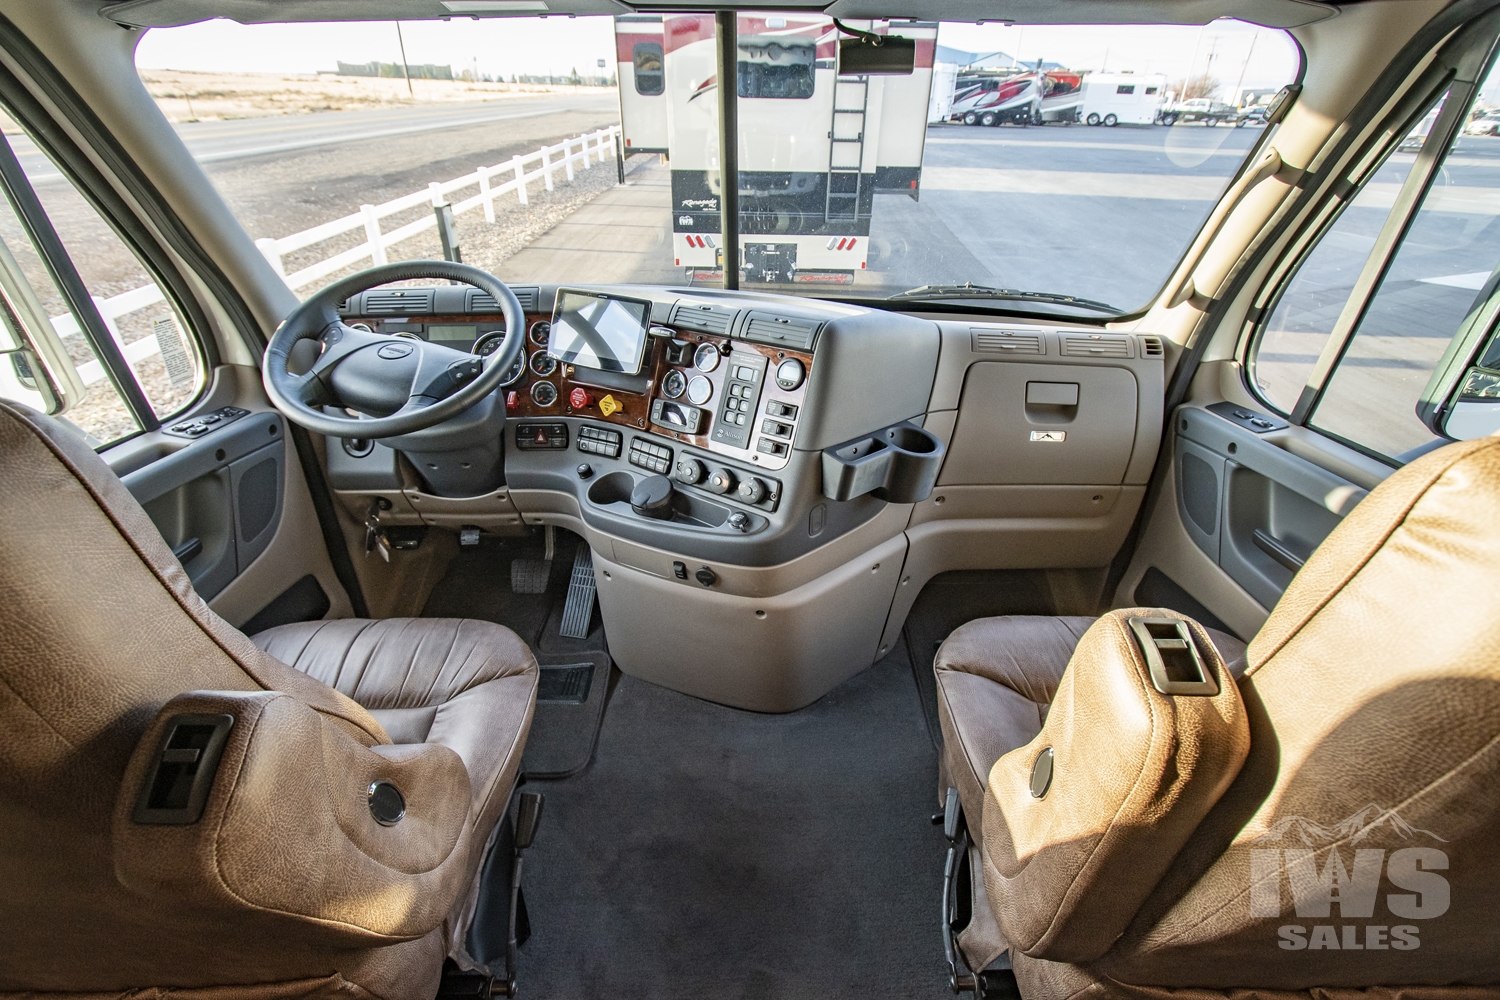 Nomadic Marvels: Semi-Truck RV Conversions with Private Balconies